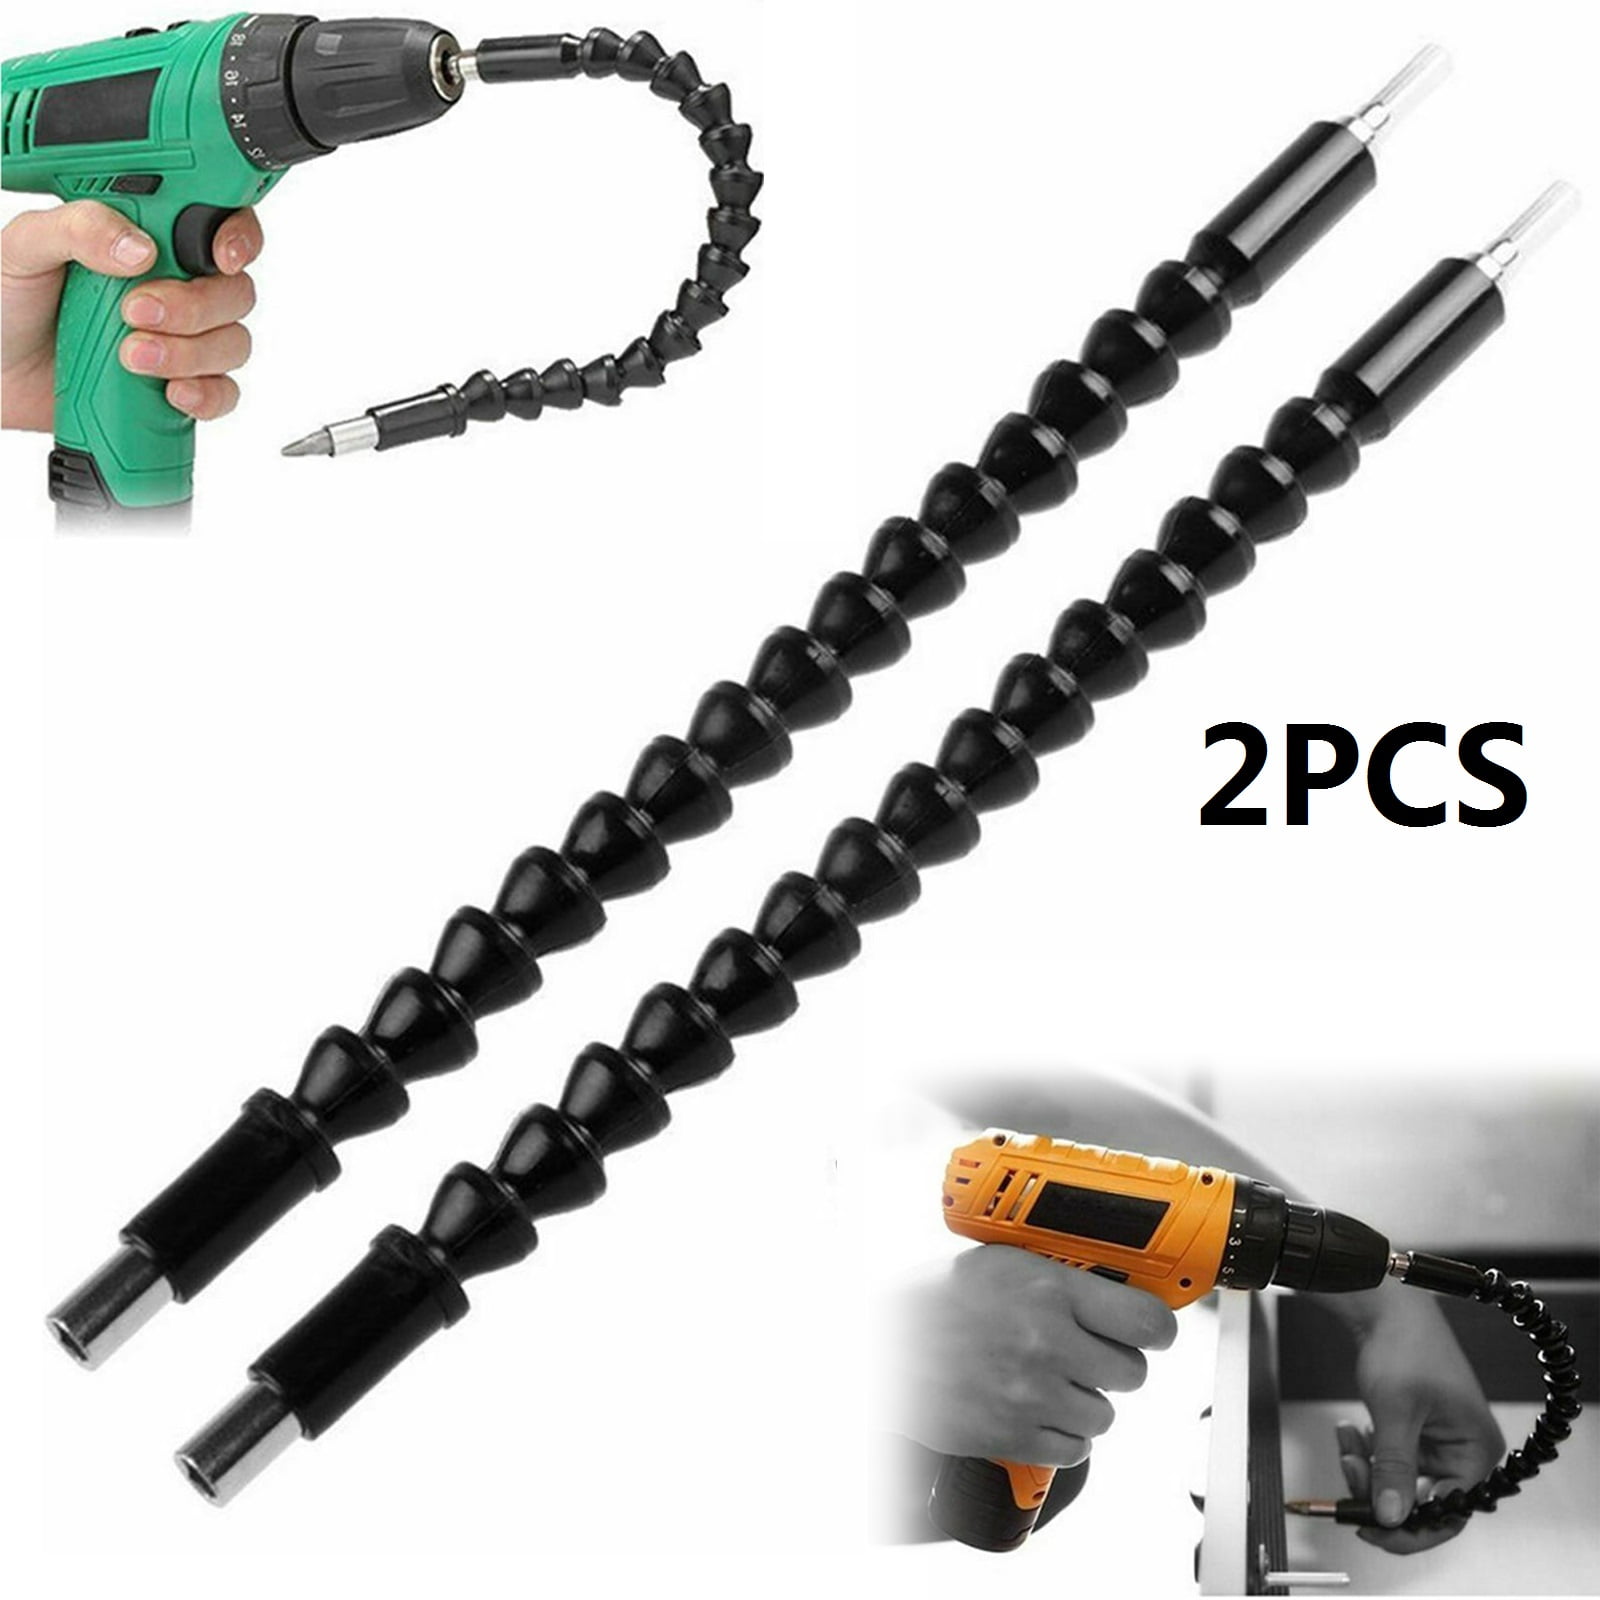 1/4 Magnetic Extend Drill Bit Holder Connect Link for Electric Drill Drill Bit Extension Flexible 3 PCS 11.8 Inch Extension Screwdriver Bits